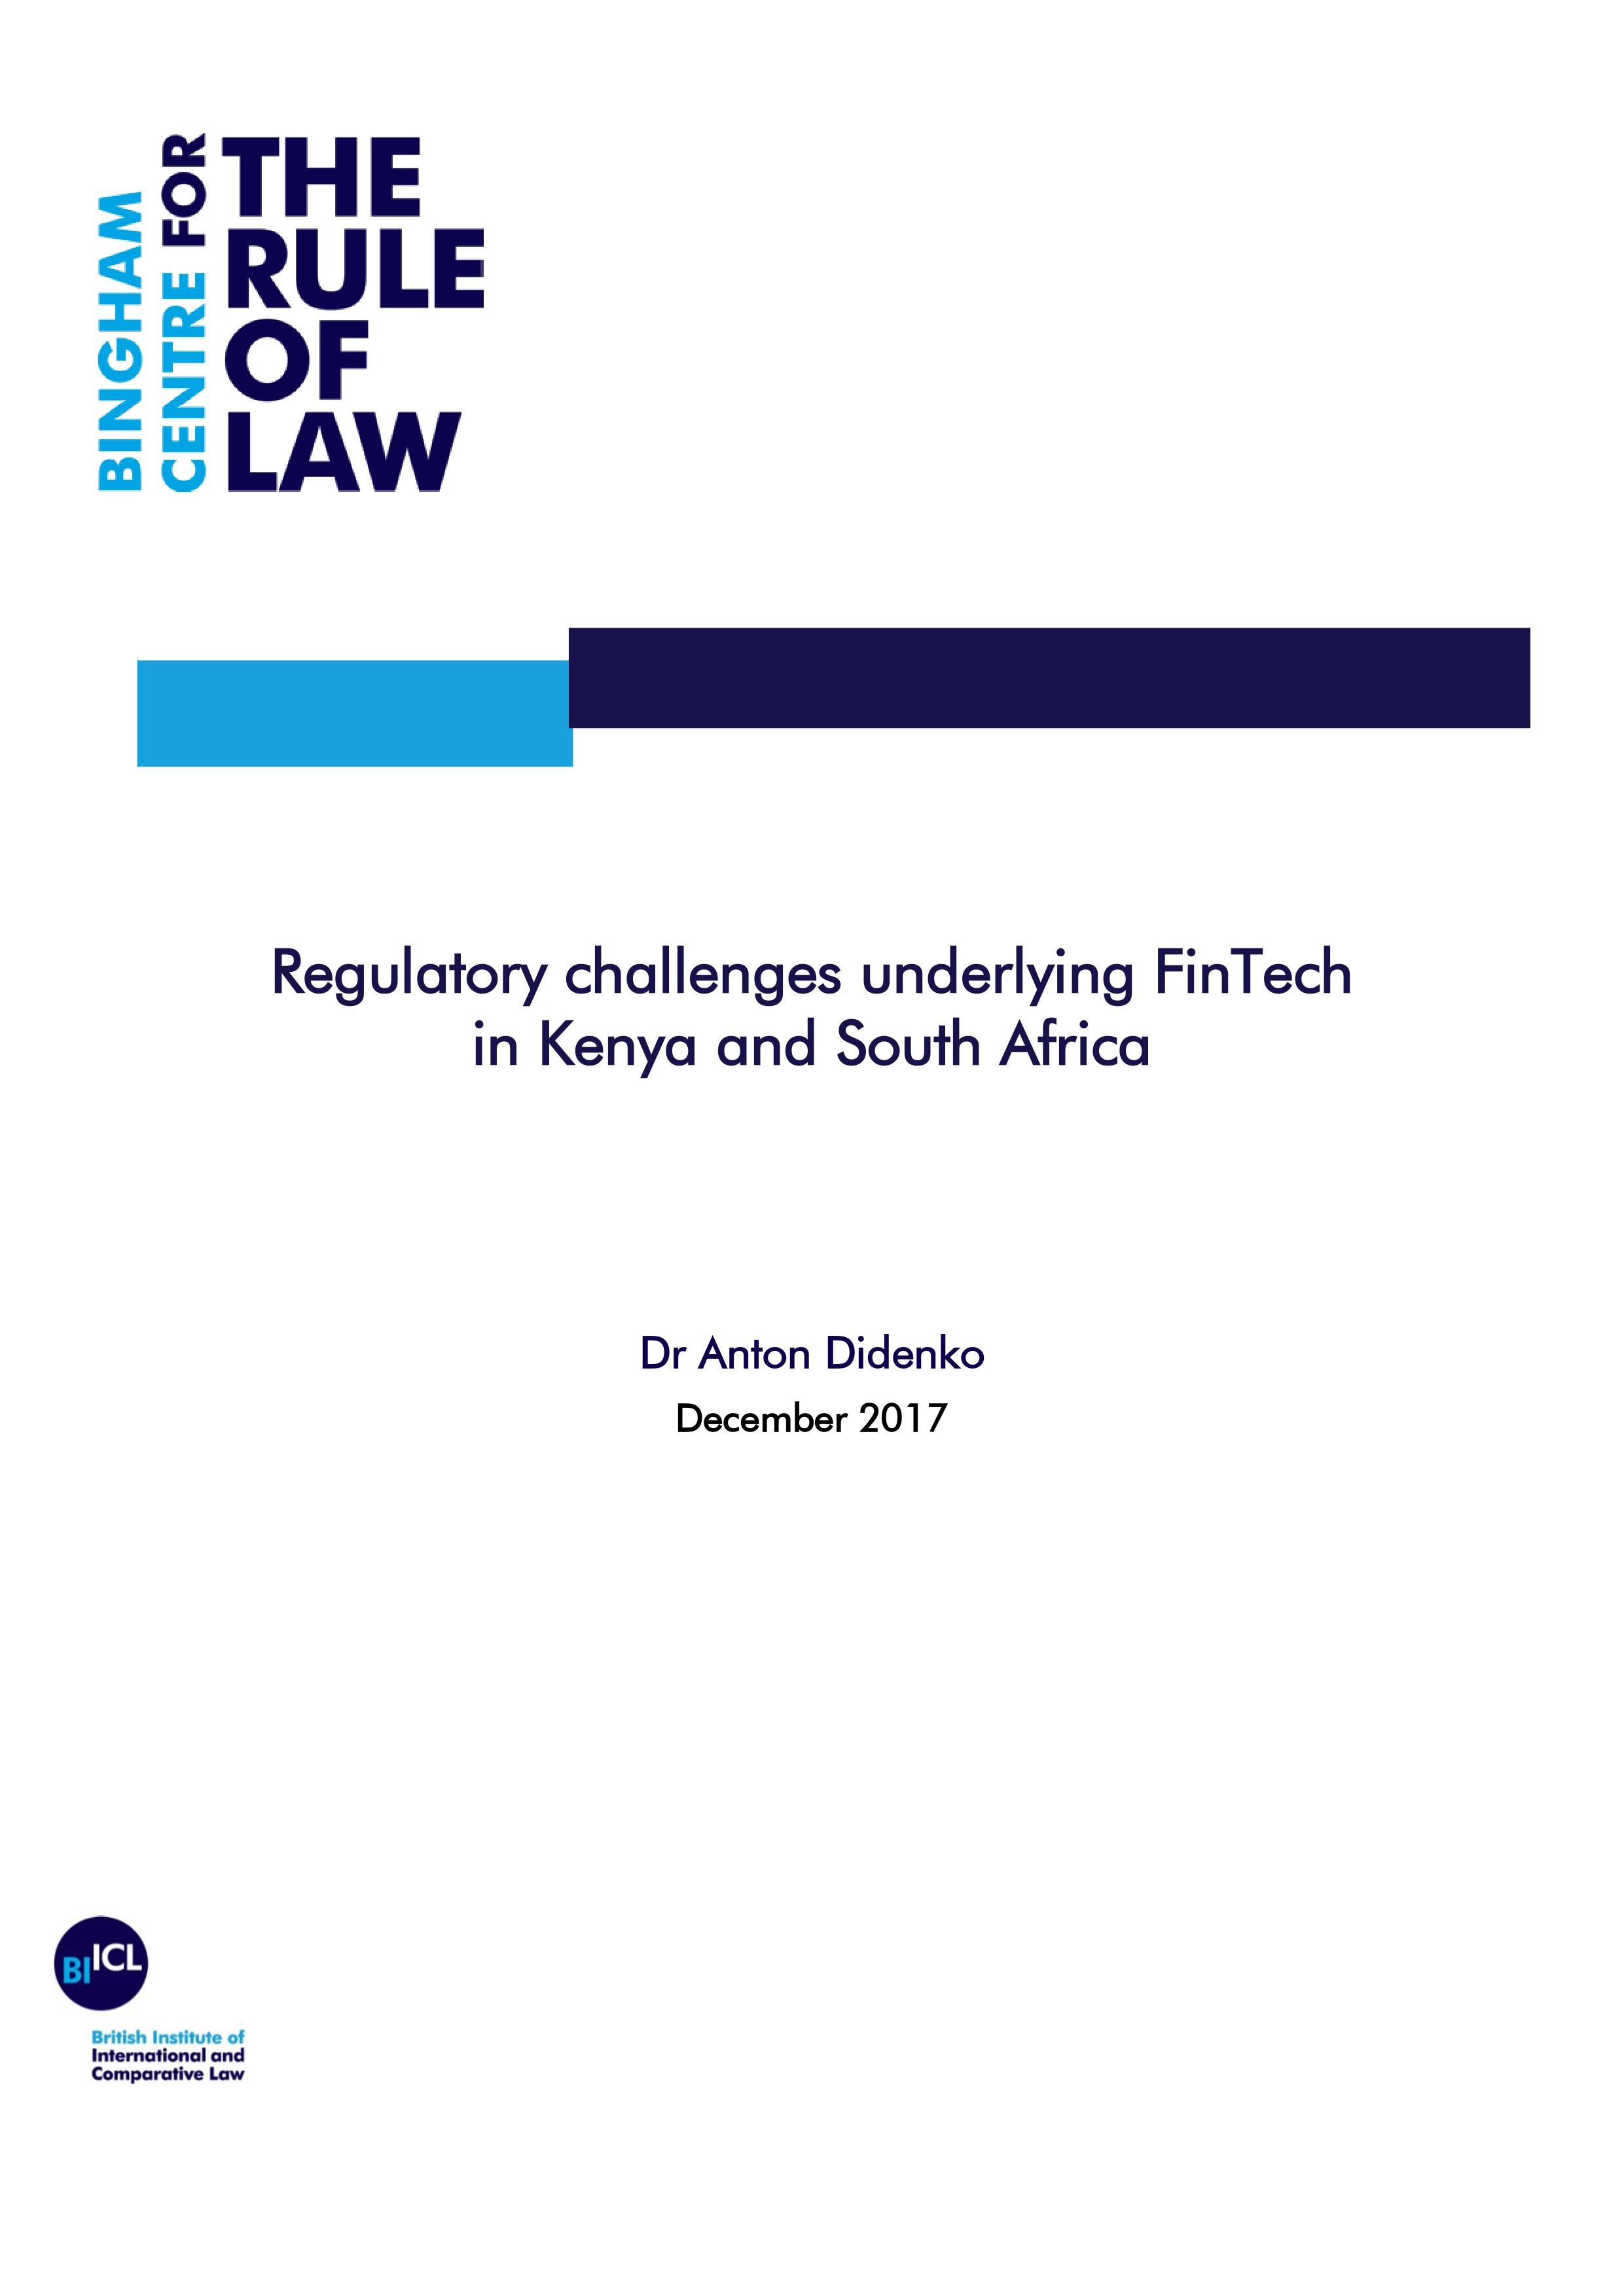 Regulatory Challenges underlying Fintech in Kenya and South Africa